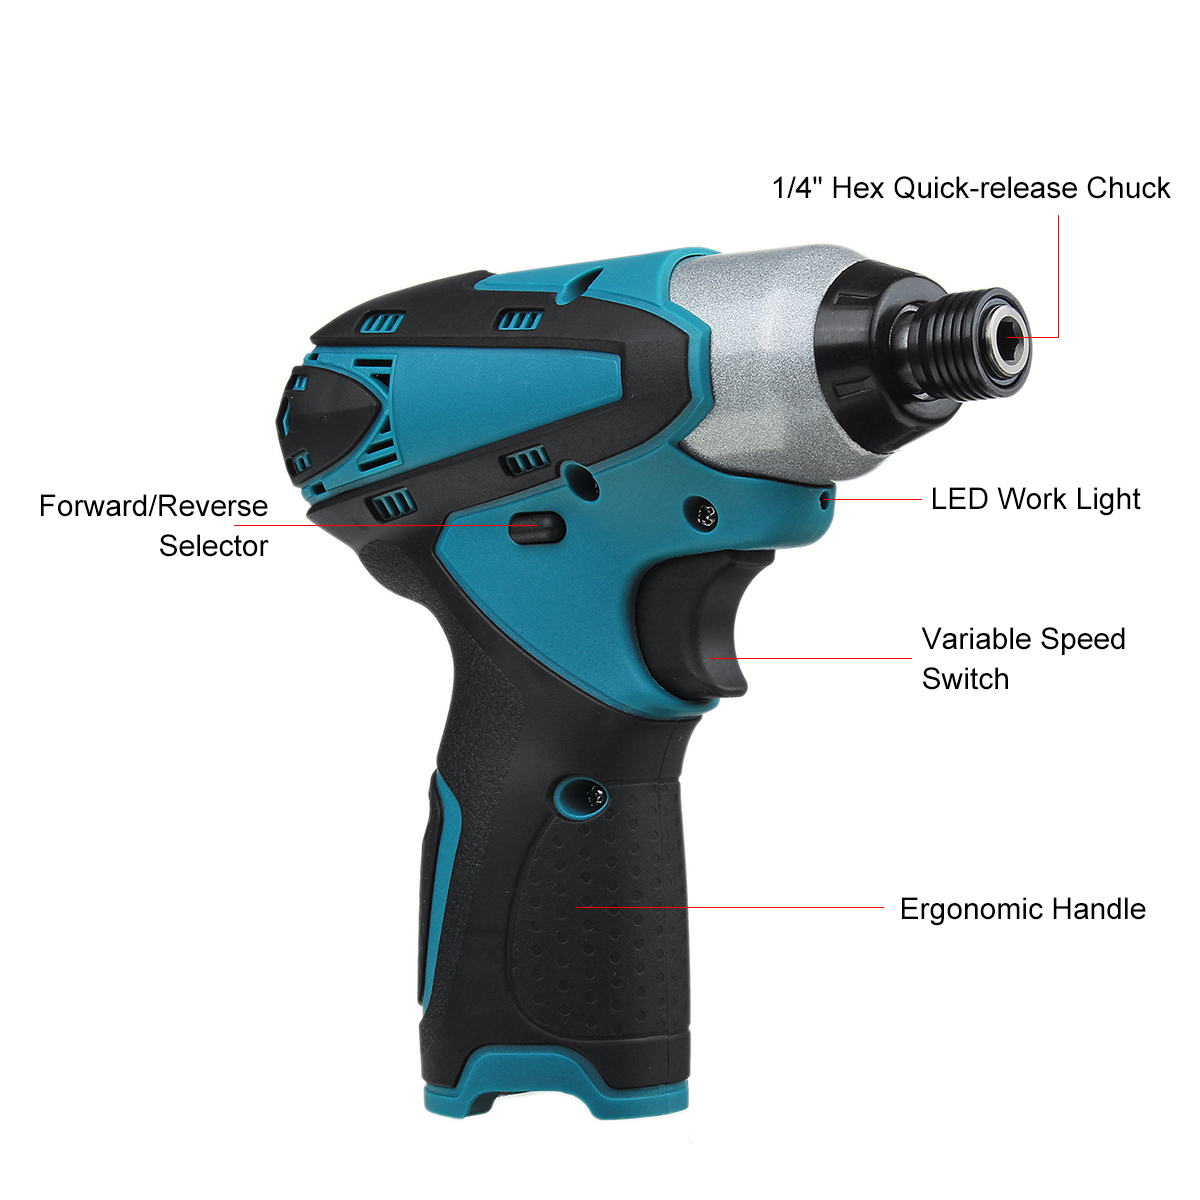 108V-Cordless-Electric-Impact-Drill-Screwdriver-Stepless-Speed-Change-Switch-For-Makita-Battery-1728712-6